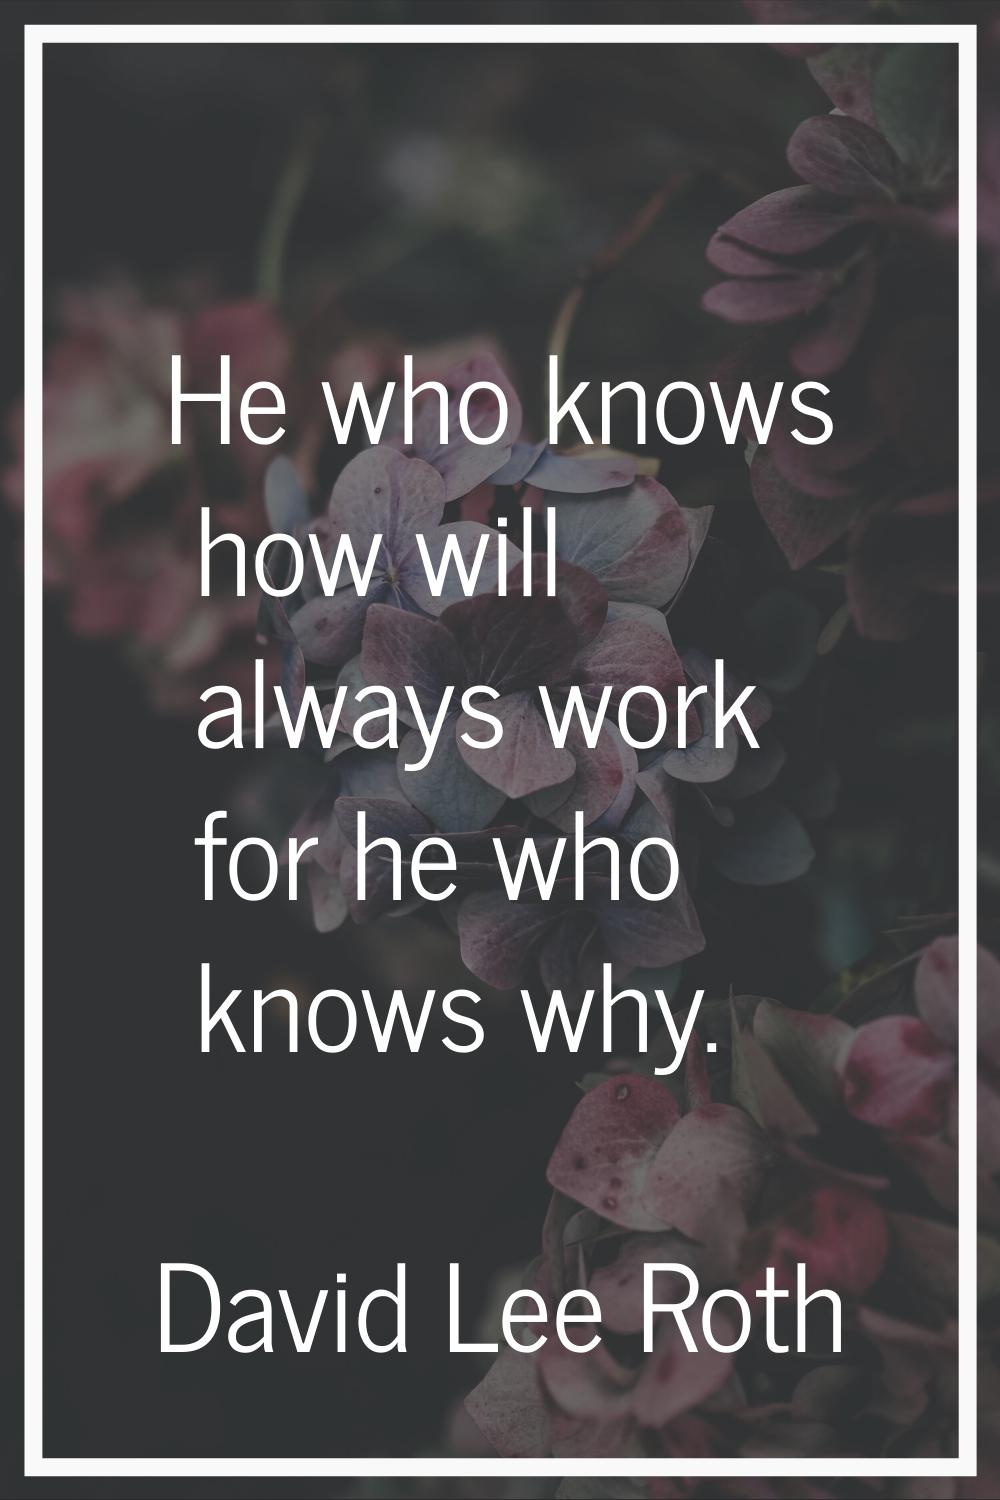 He who knows how will always work for he who knows why.